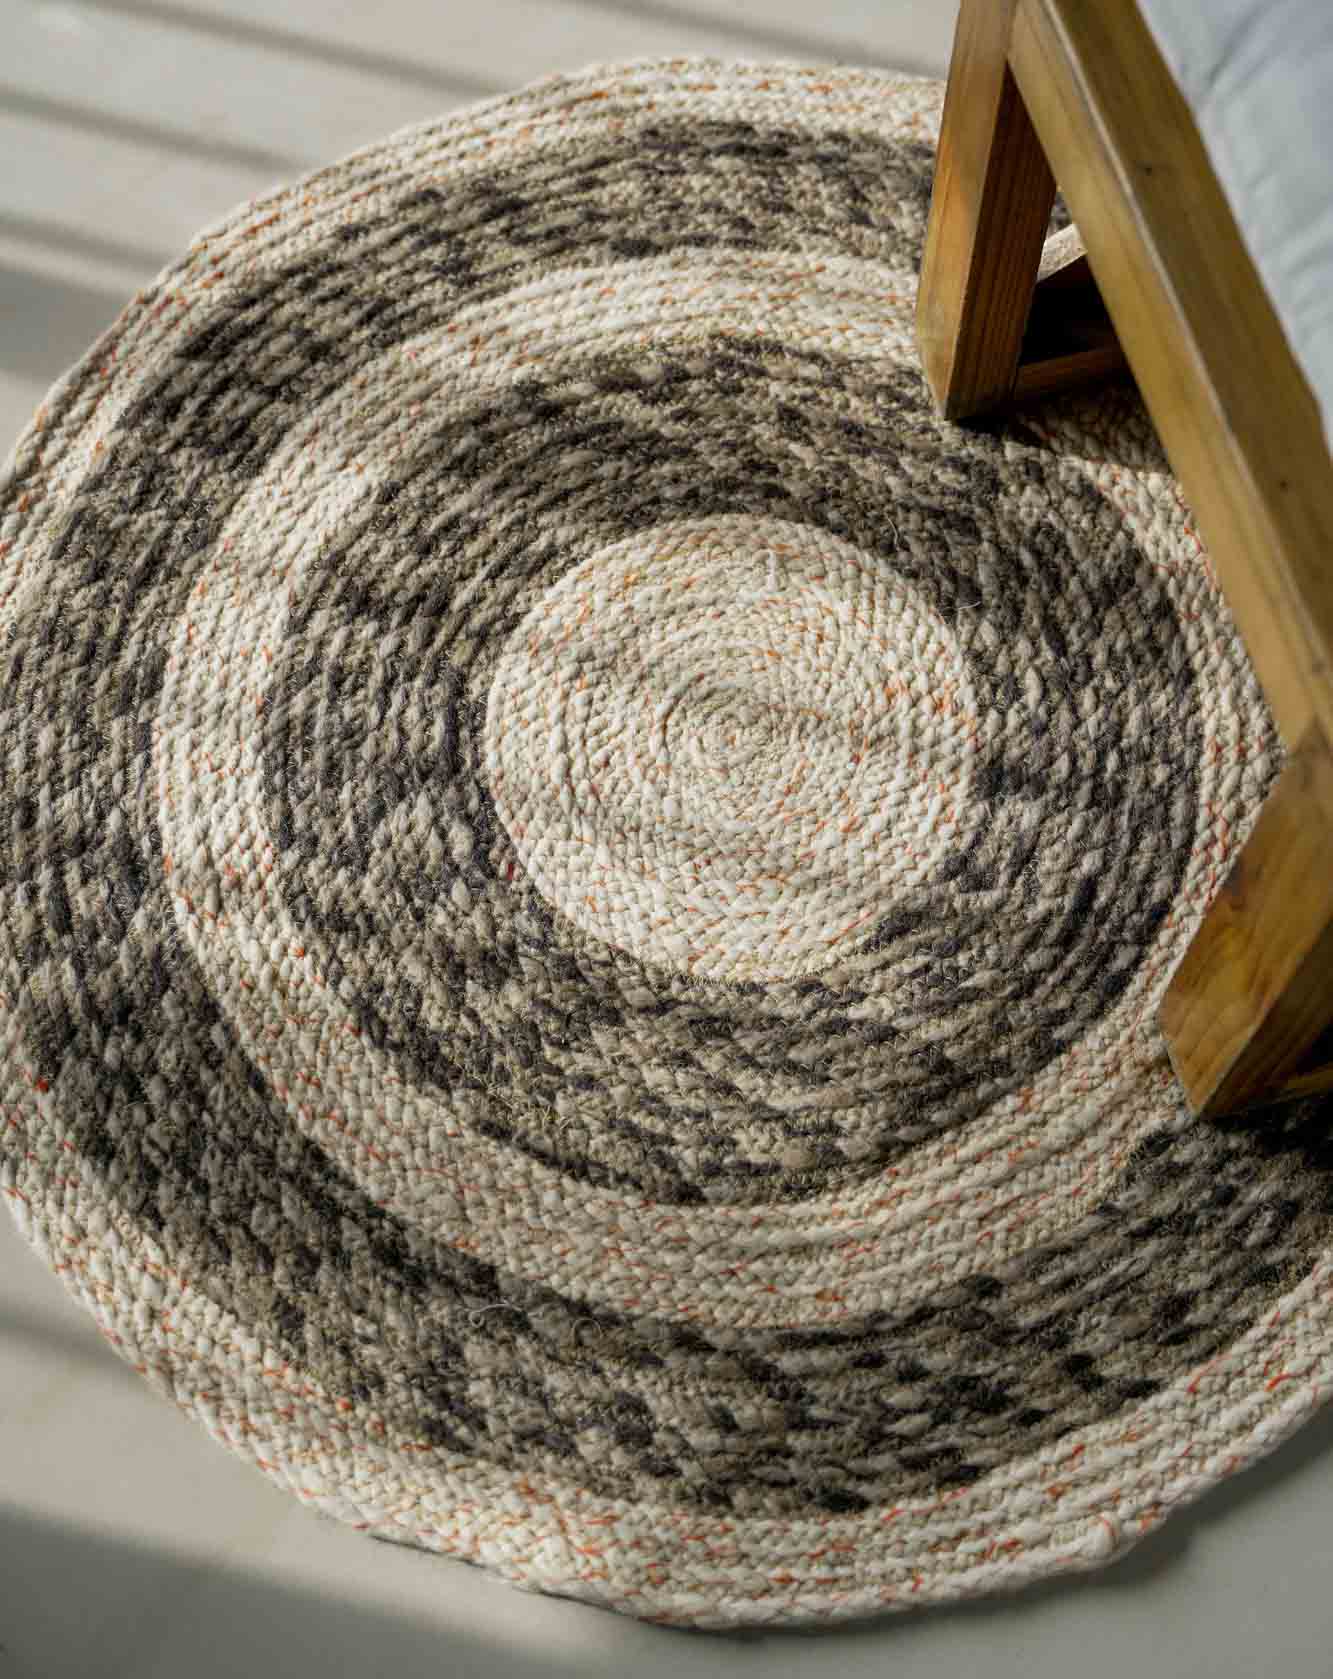 Coastal Comfort: Relaxed Living with Woolen Rugs